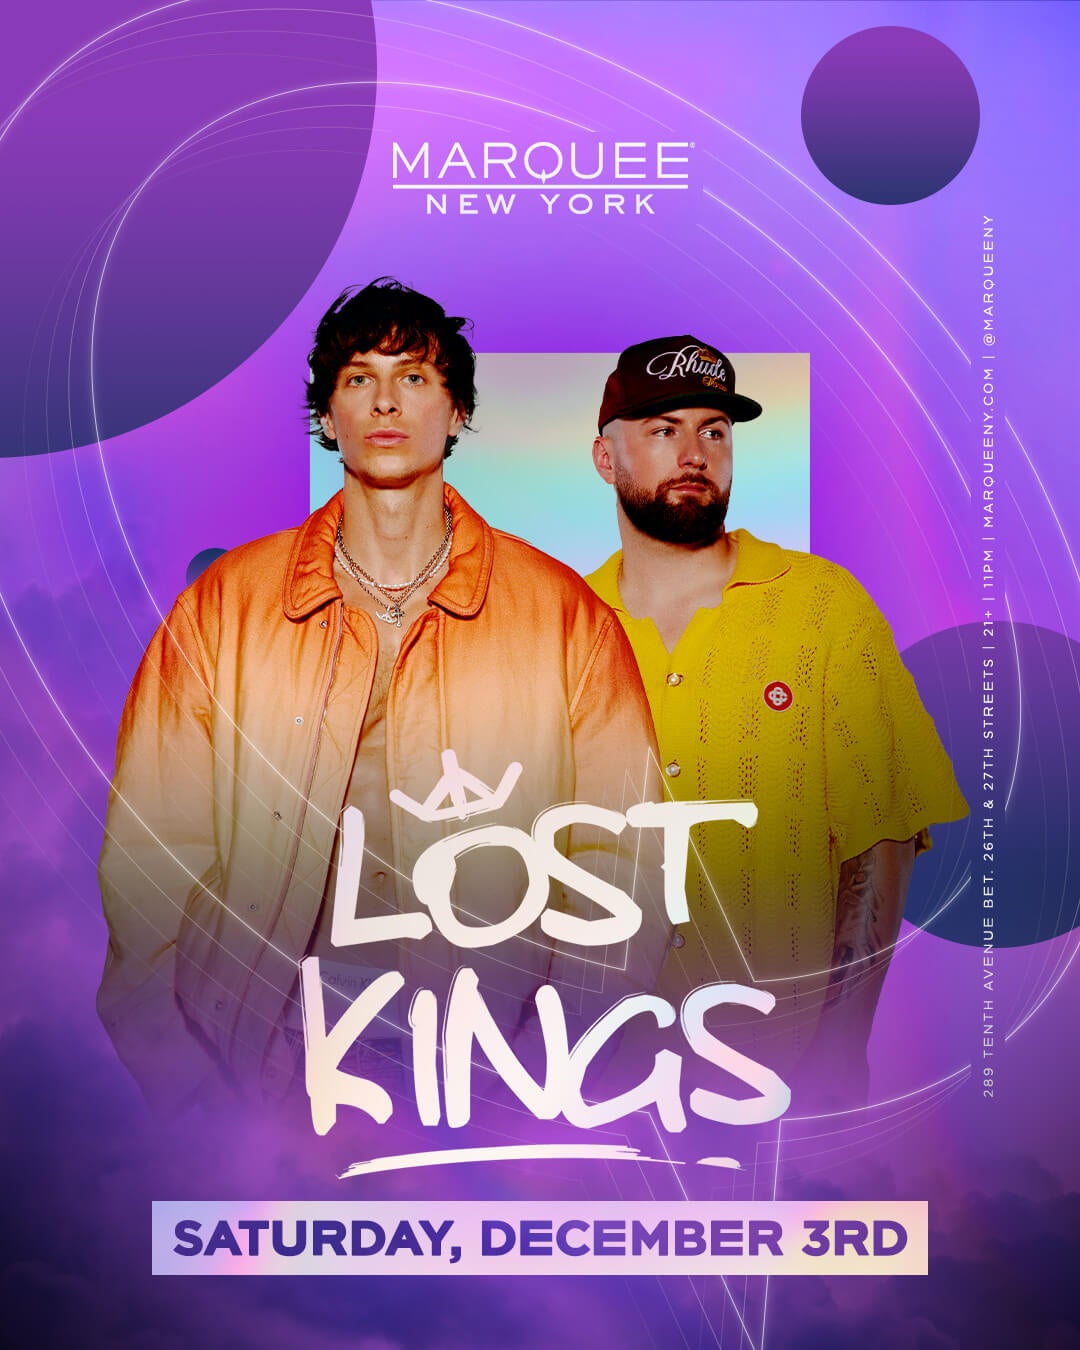 12/3/22 – Lost Kings – Marquee New York